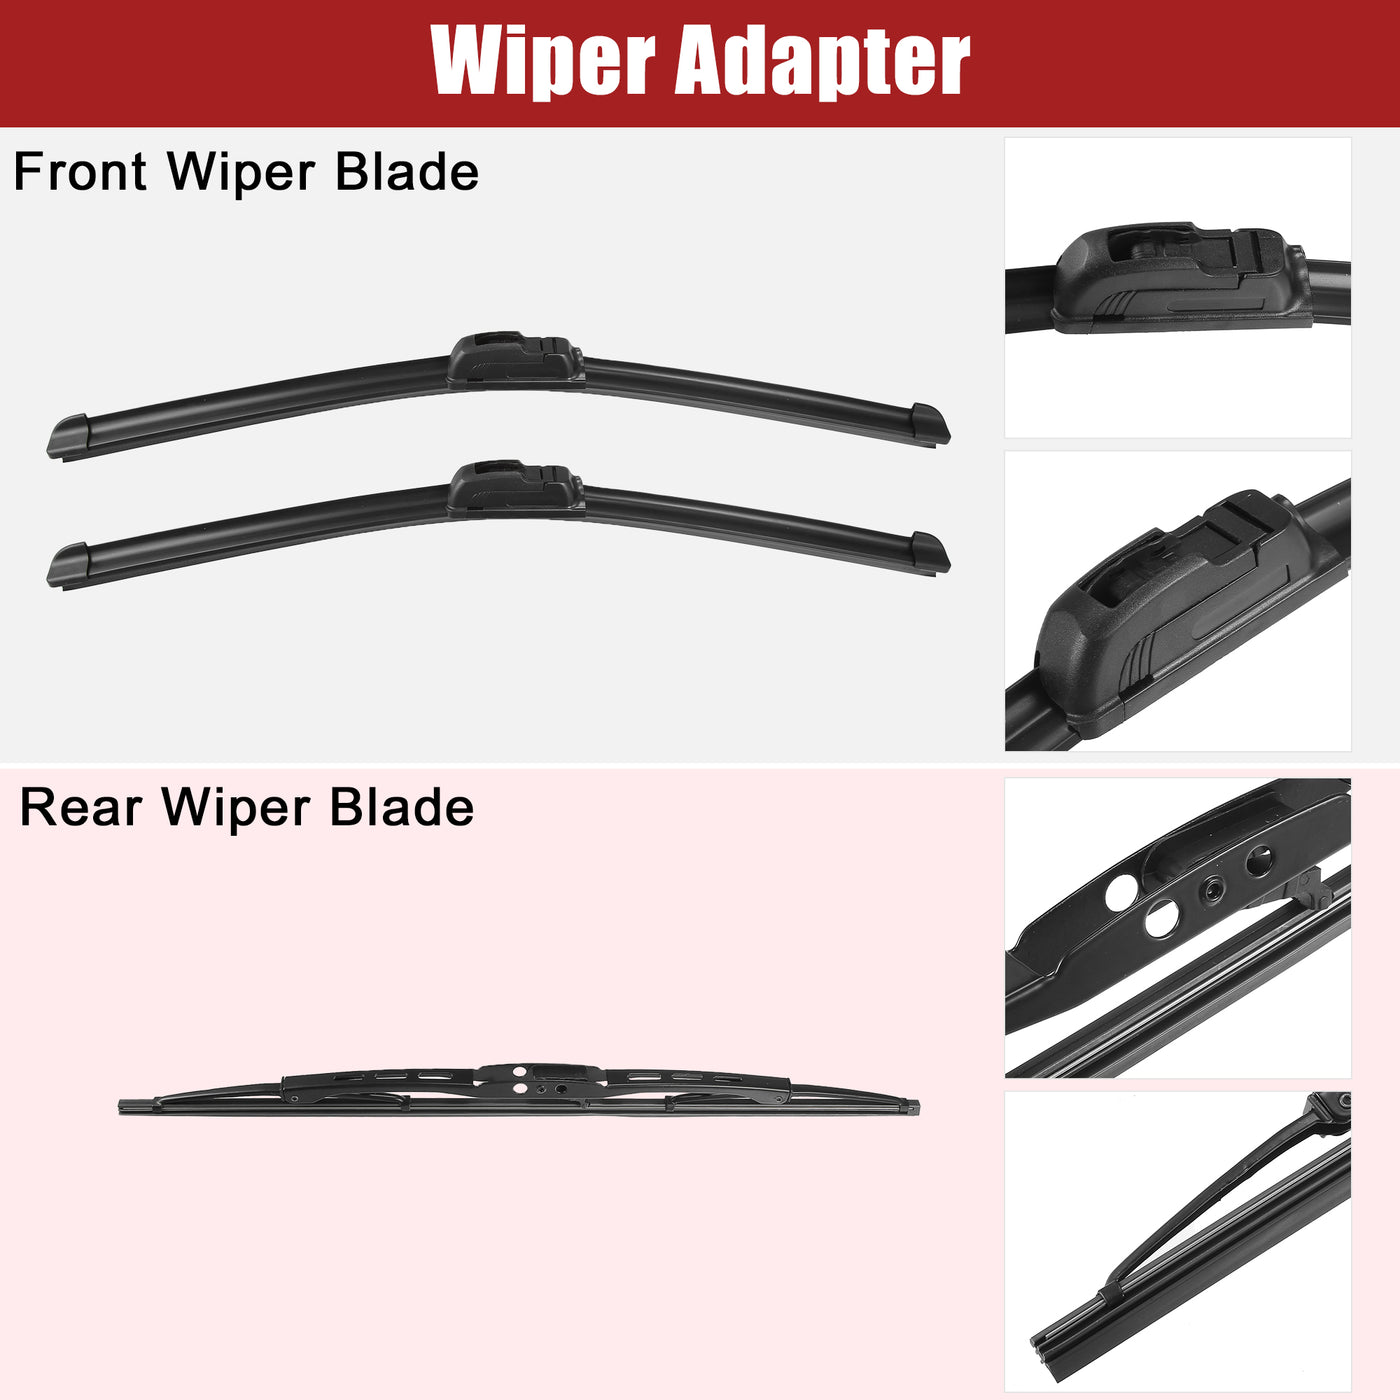 ACROPIX 19" 19" 16" Front Rear Windshield Wiper Blade Set Fit for Toyota Sequoia - Pack of 3 Black